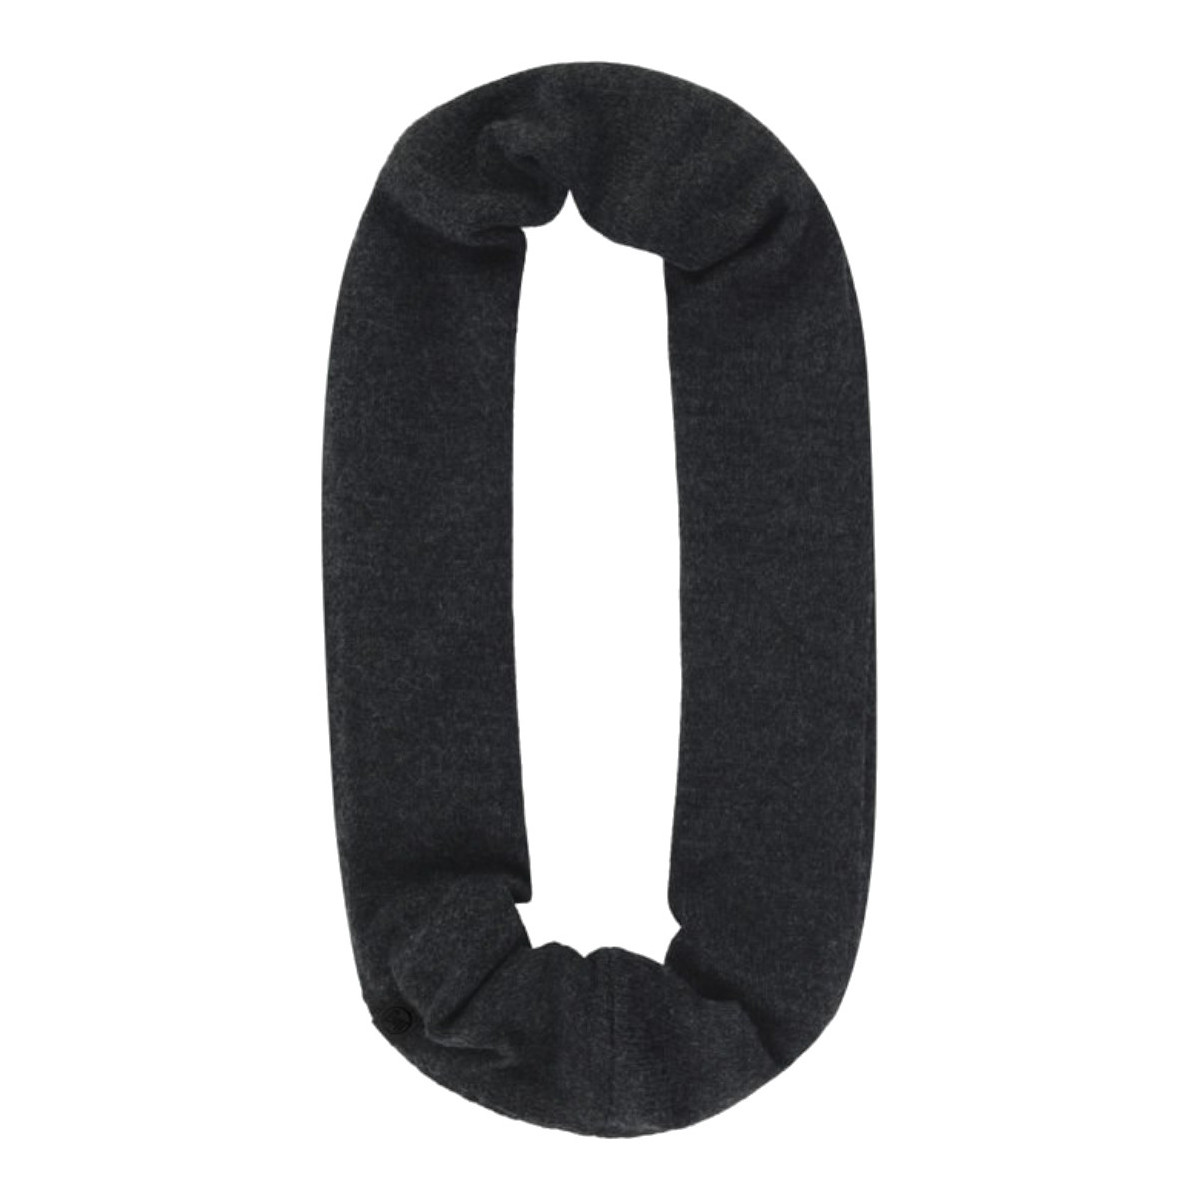 Accesorios textil Mujer Bufanda Buff Yulia Knitted Infinity Scarf Gris